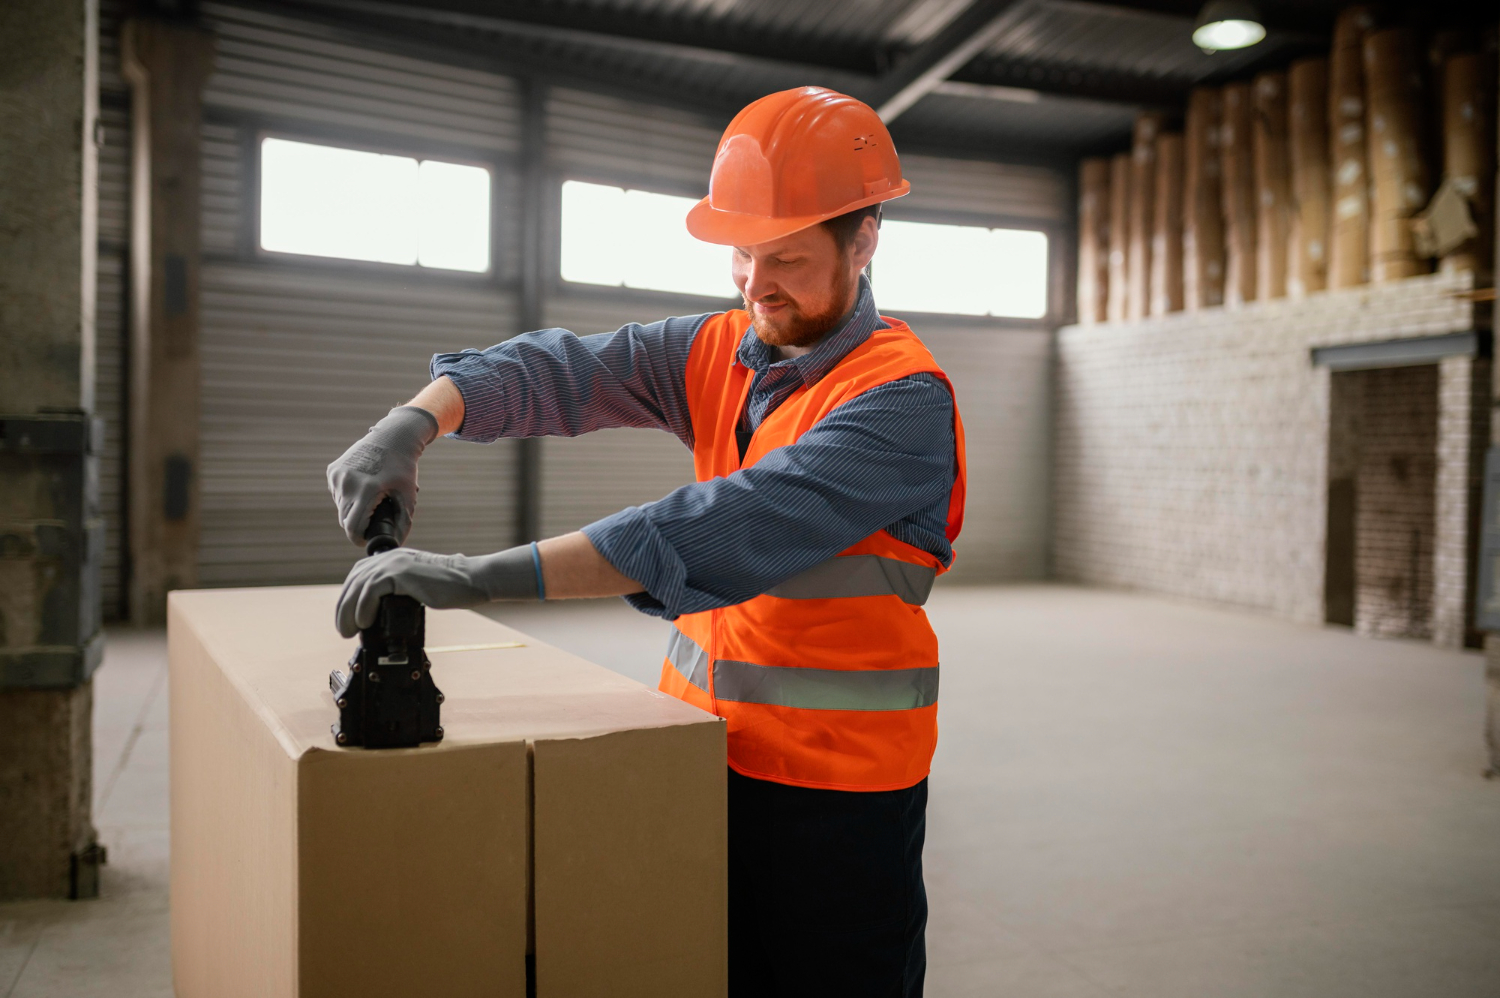 Is Manual Handling Training Really That Important